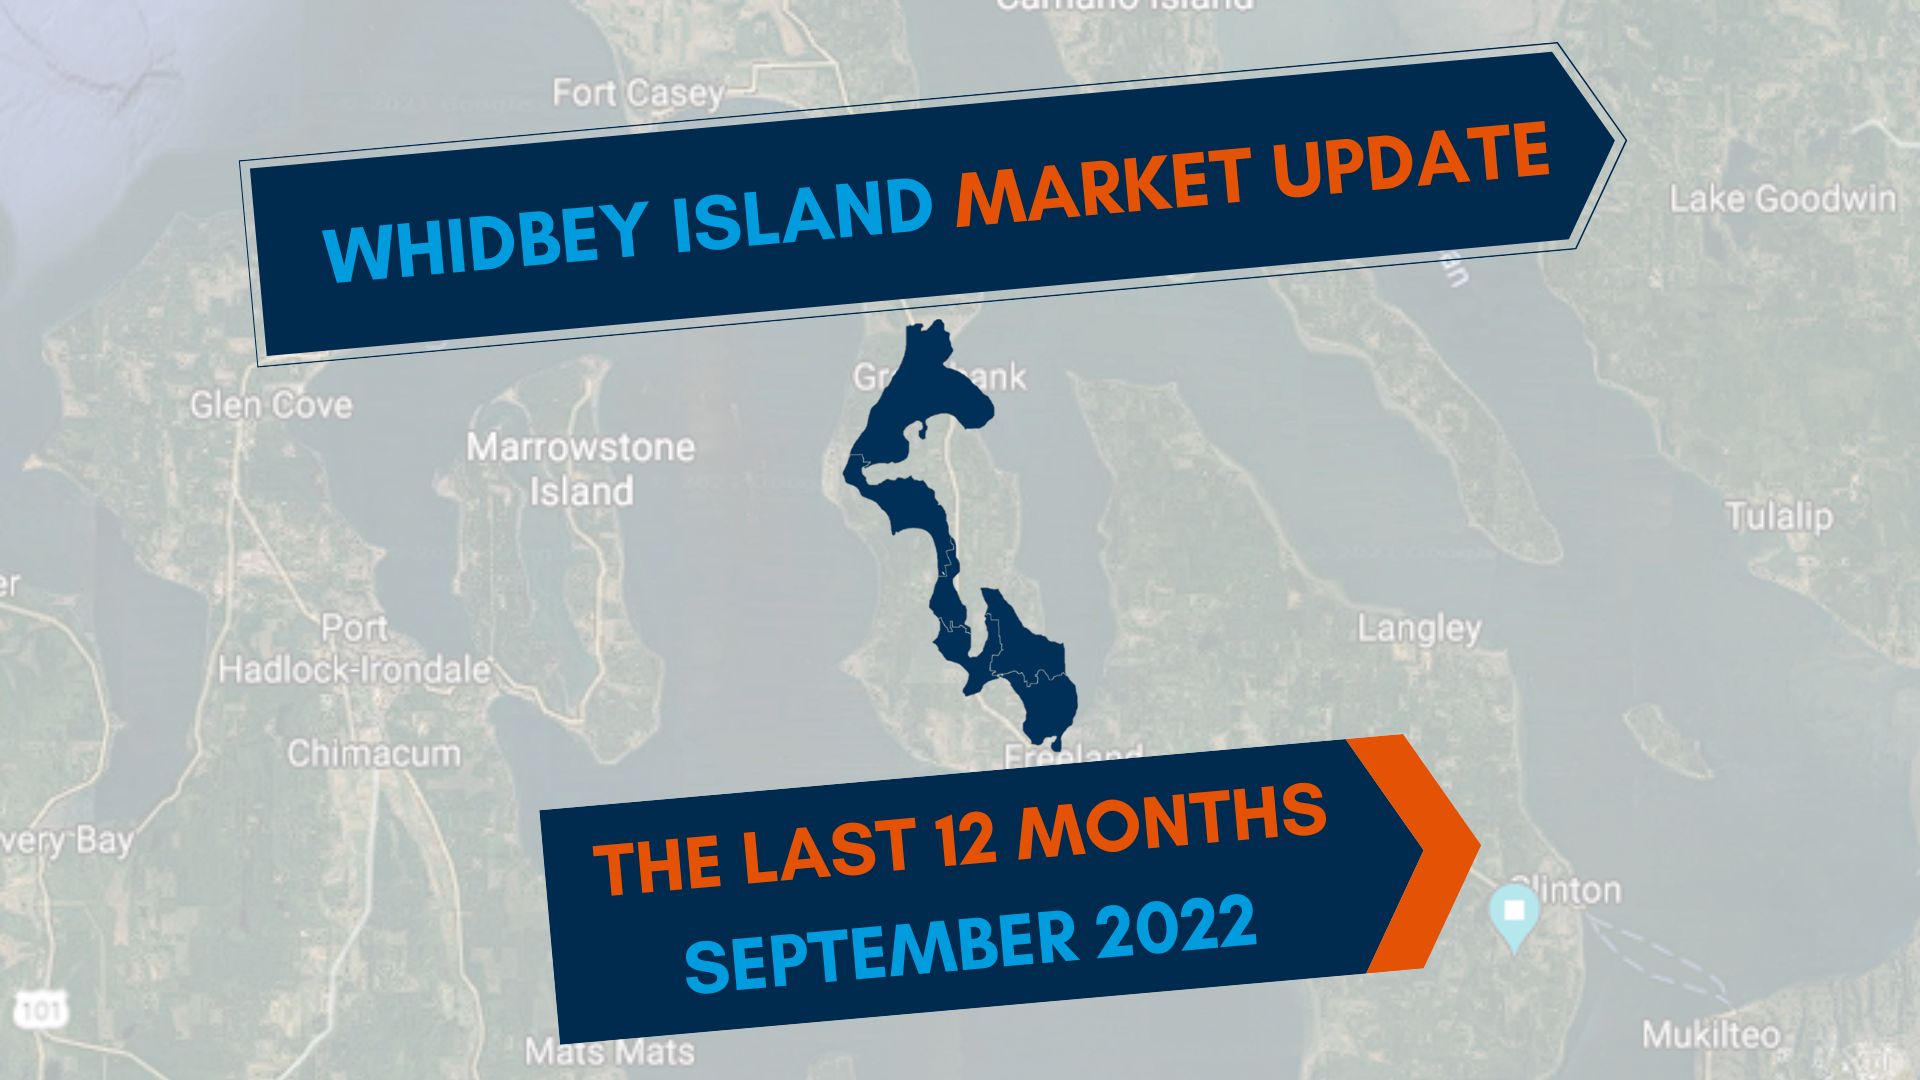 SEPTEMBER 2022 Whidbey Island Real Estate Market Update